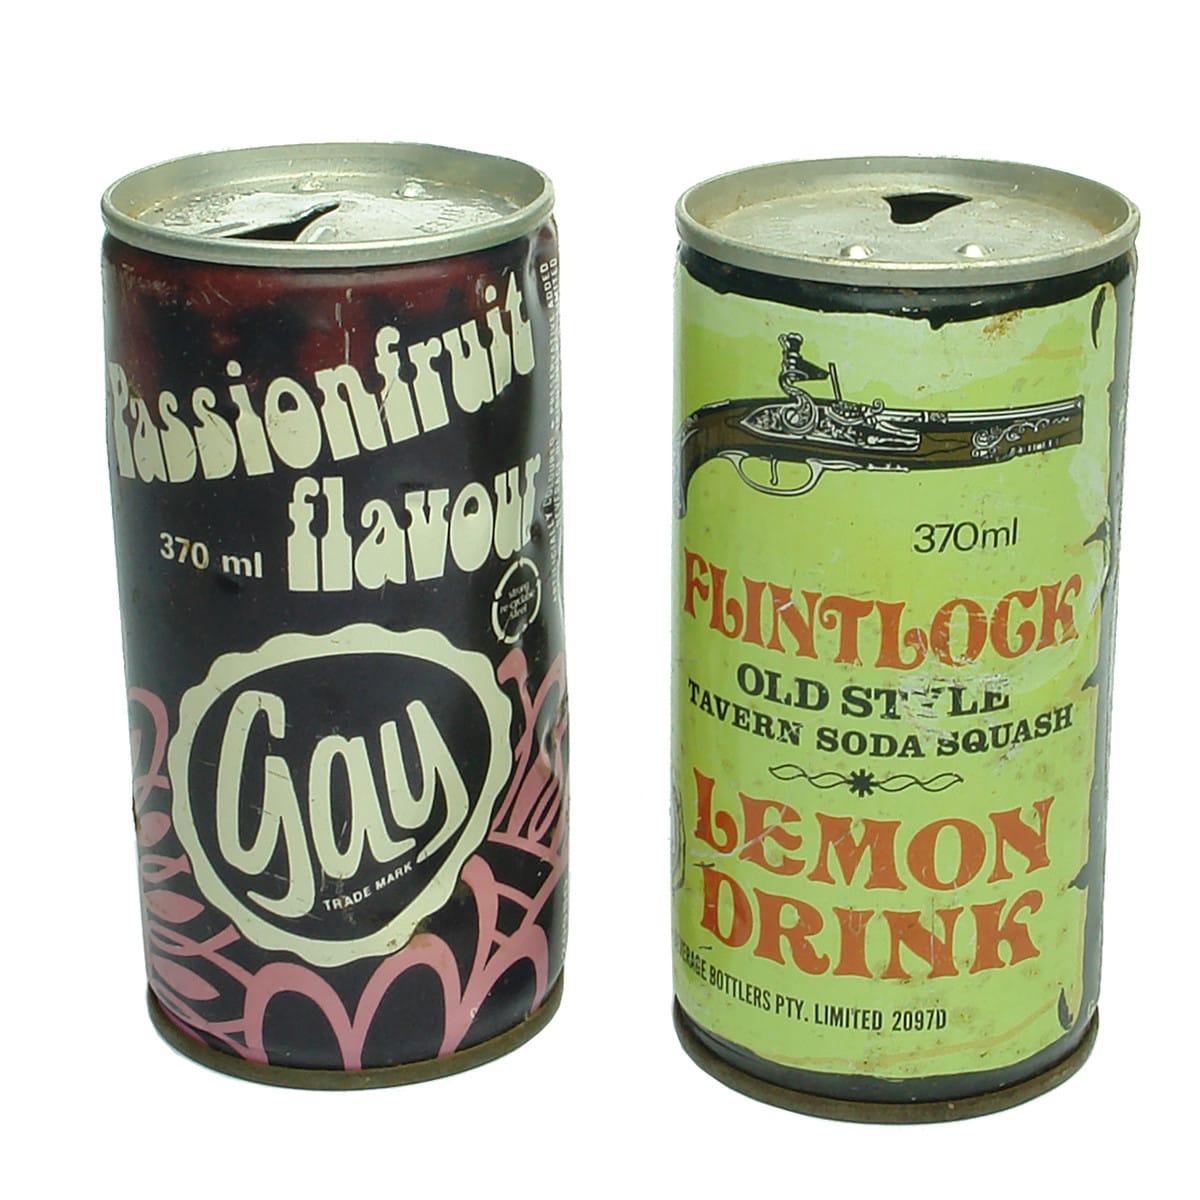 Pair of Soft Drink Cans. Gay Soft Drinks Newcastle. Flintlock lemon drink and Passionfruit Flavour. (New South Wales)